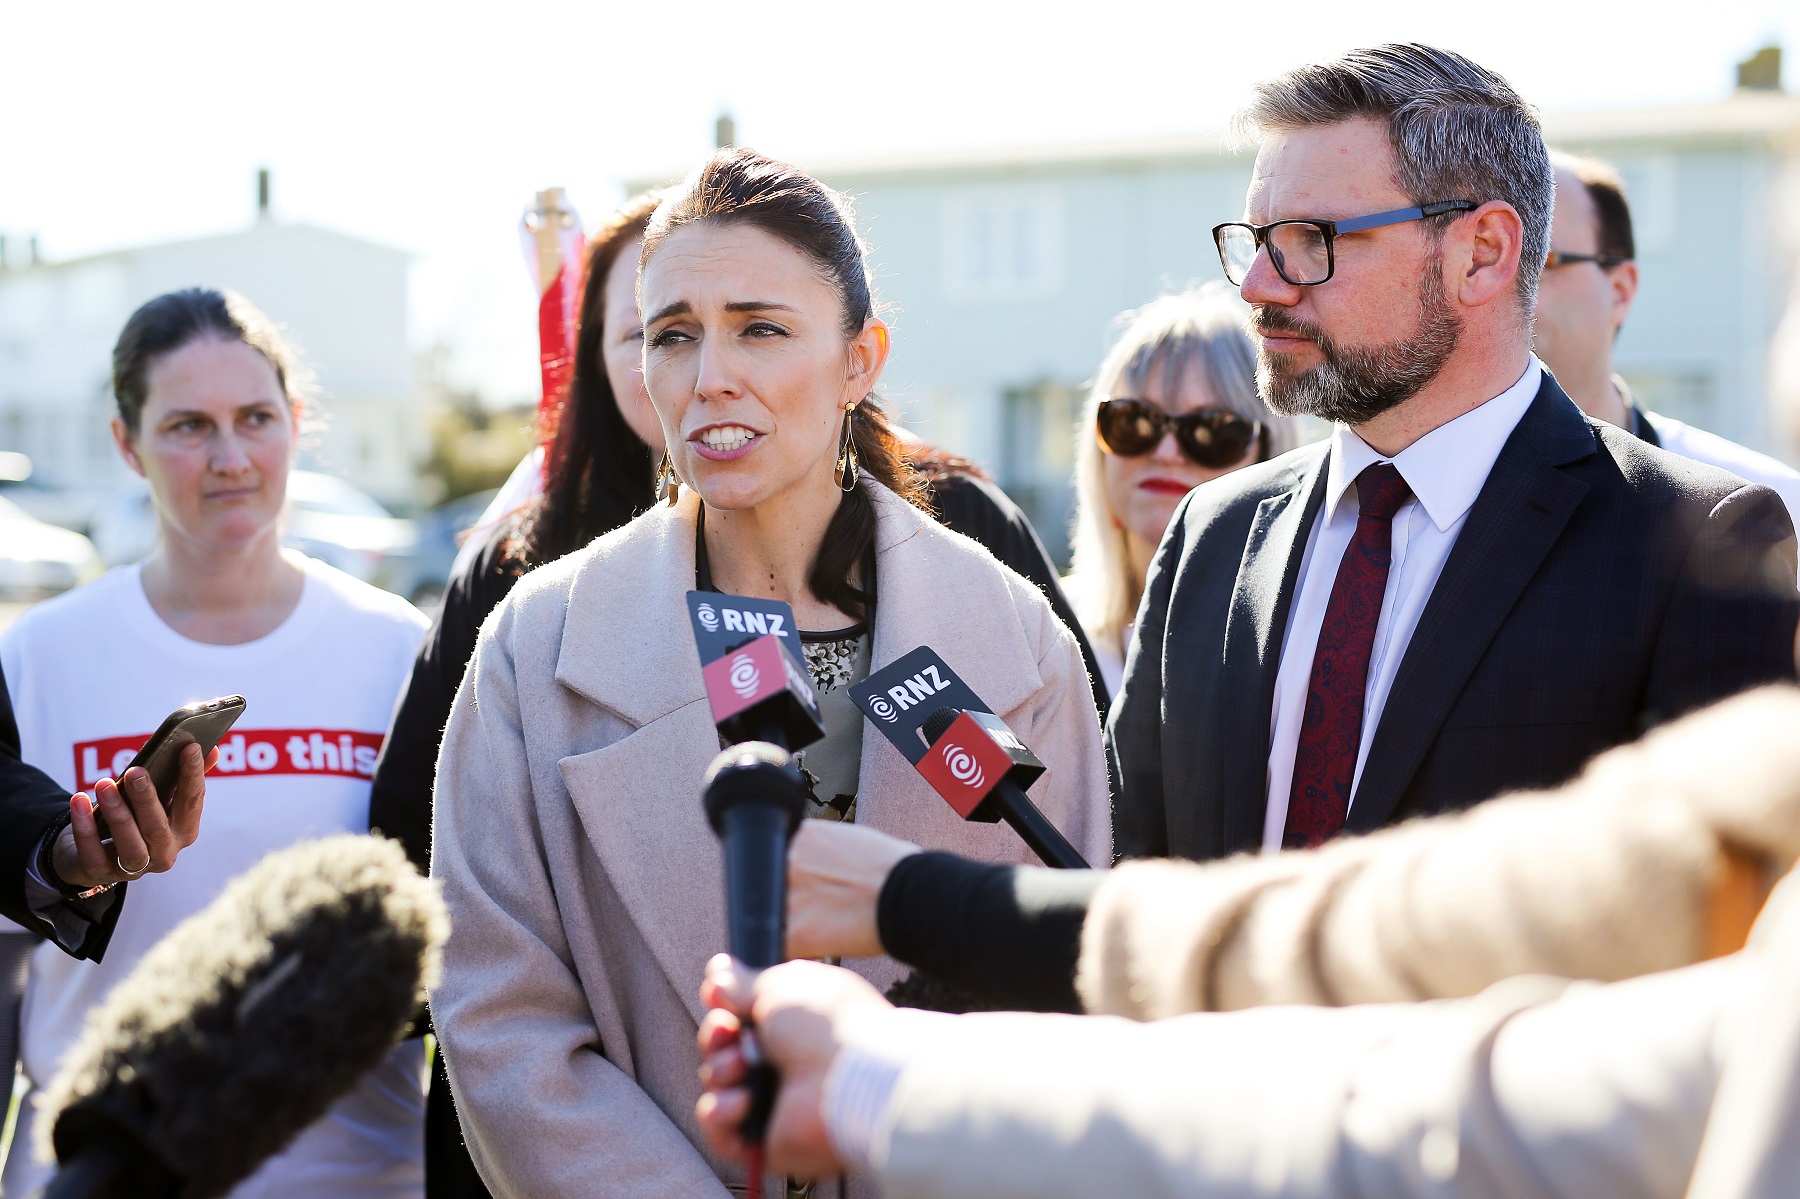 PALMERSTON NORTH, NEW ZEALAND - AUGUST 23:  Labour leader Jacinda Ardern speaks to media while MP for Palmerston North, Iain Lees-Galloway, looks on during a housing announcement at Farnham Park on August 23, 2017 in Palmerston North, New Zealand. Ardern announced that Labour will build 149 homes in Palmerston North, a mix of KiwiBuild starter homes for first homebuyers and state houses, to help tackle home affordability and homelessness.  (Photo by Hagen Hopkins/Getty Images)